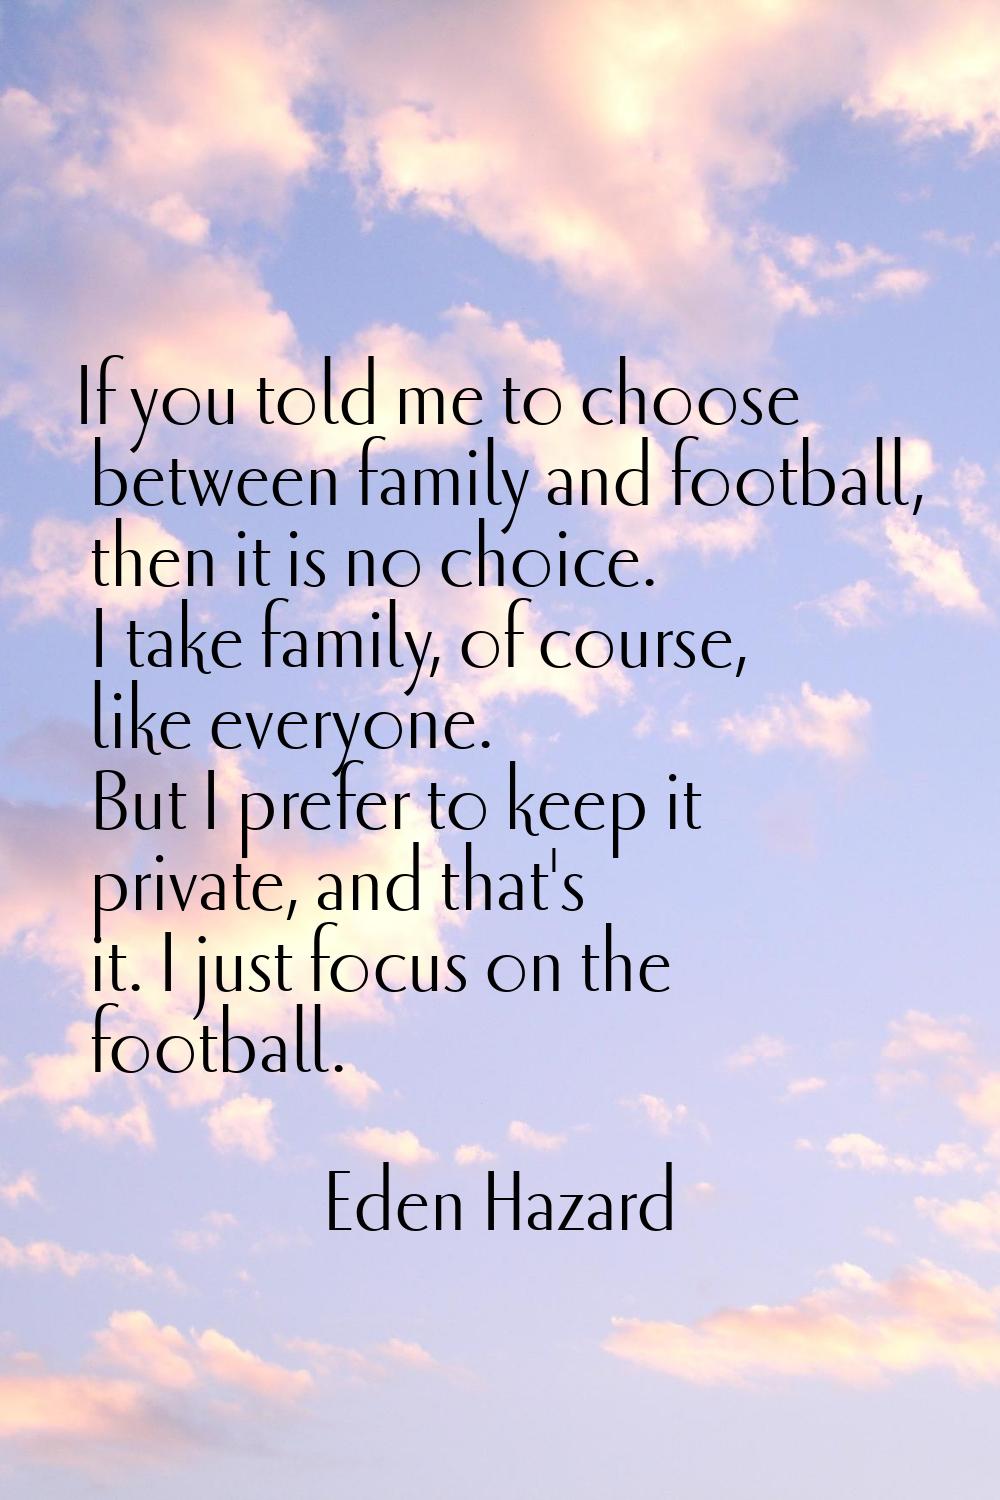 If you told me to choose between family and football, then it is no choice. I take family, of cours